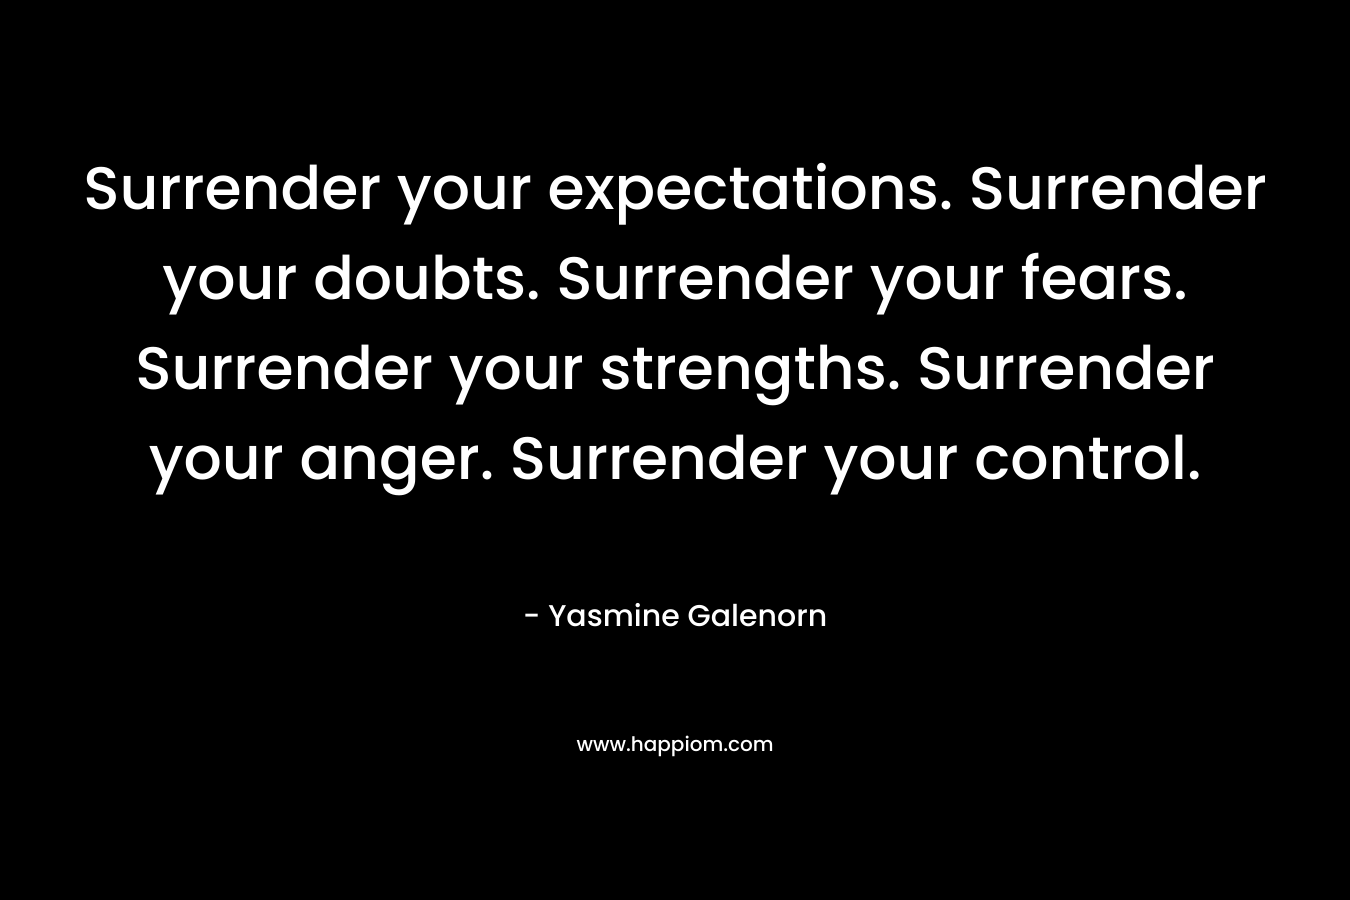 Surrender your expectations. Surrender your doubts. Surrender your fears. Surrender your strengths. Surrender your anger. Surrender your control.